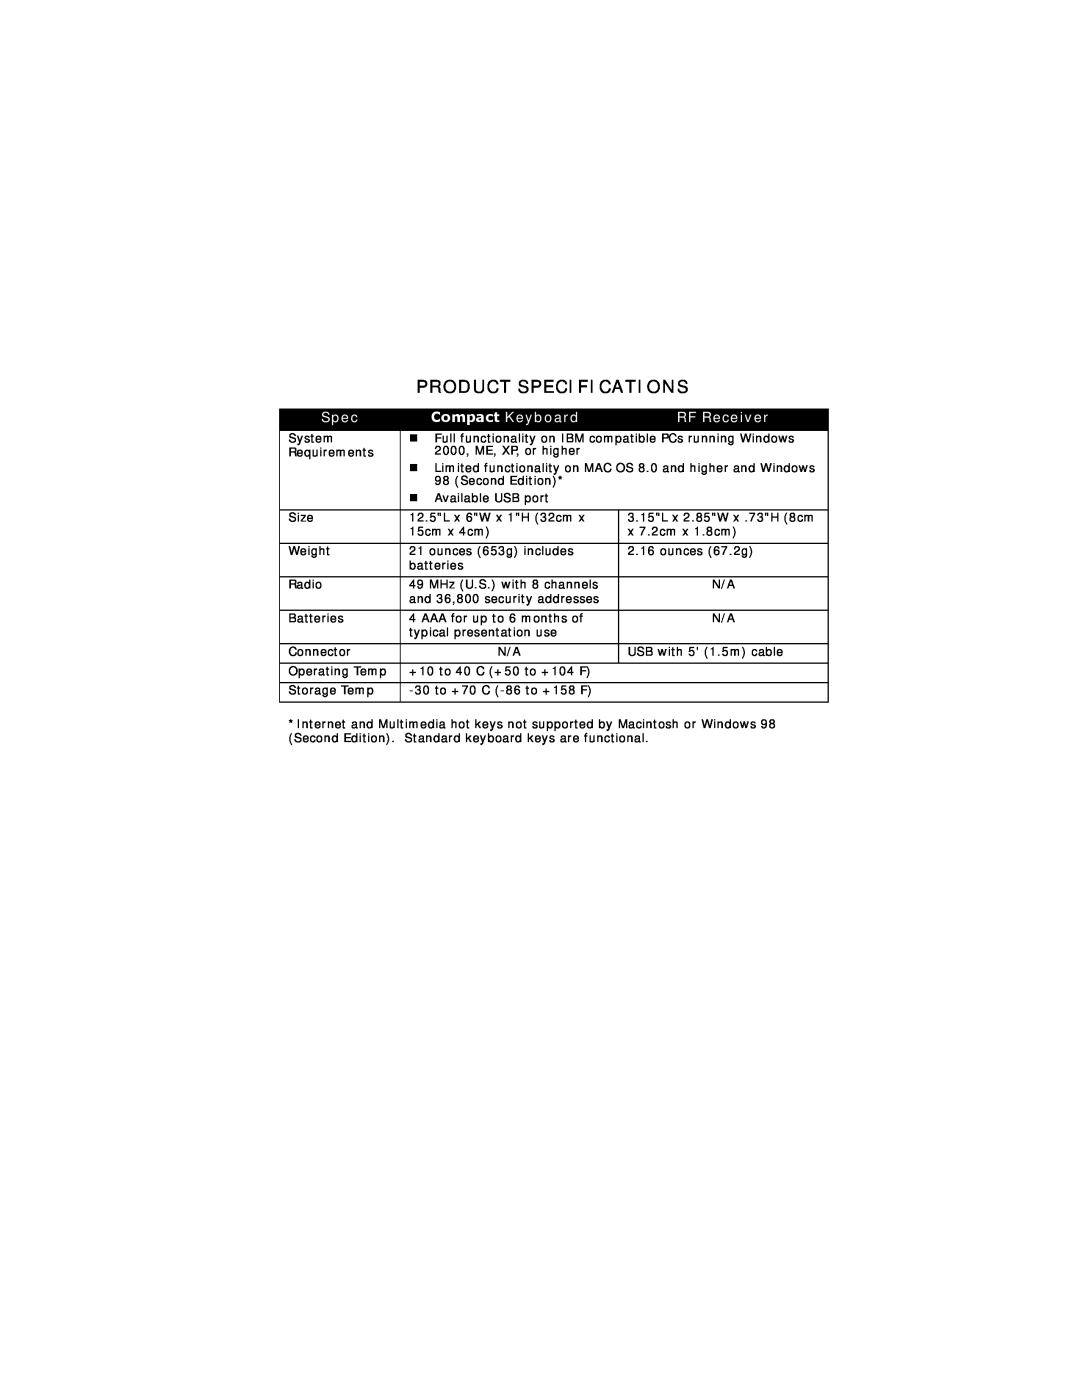 Gyration Compact Keyboard user manual Product Specifications, RF Receiver 